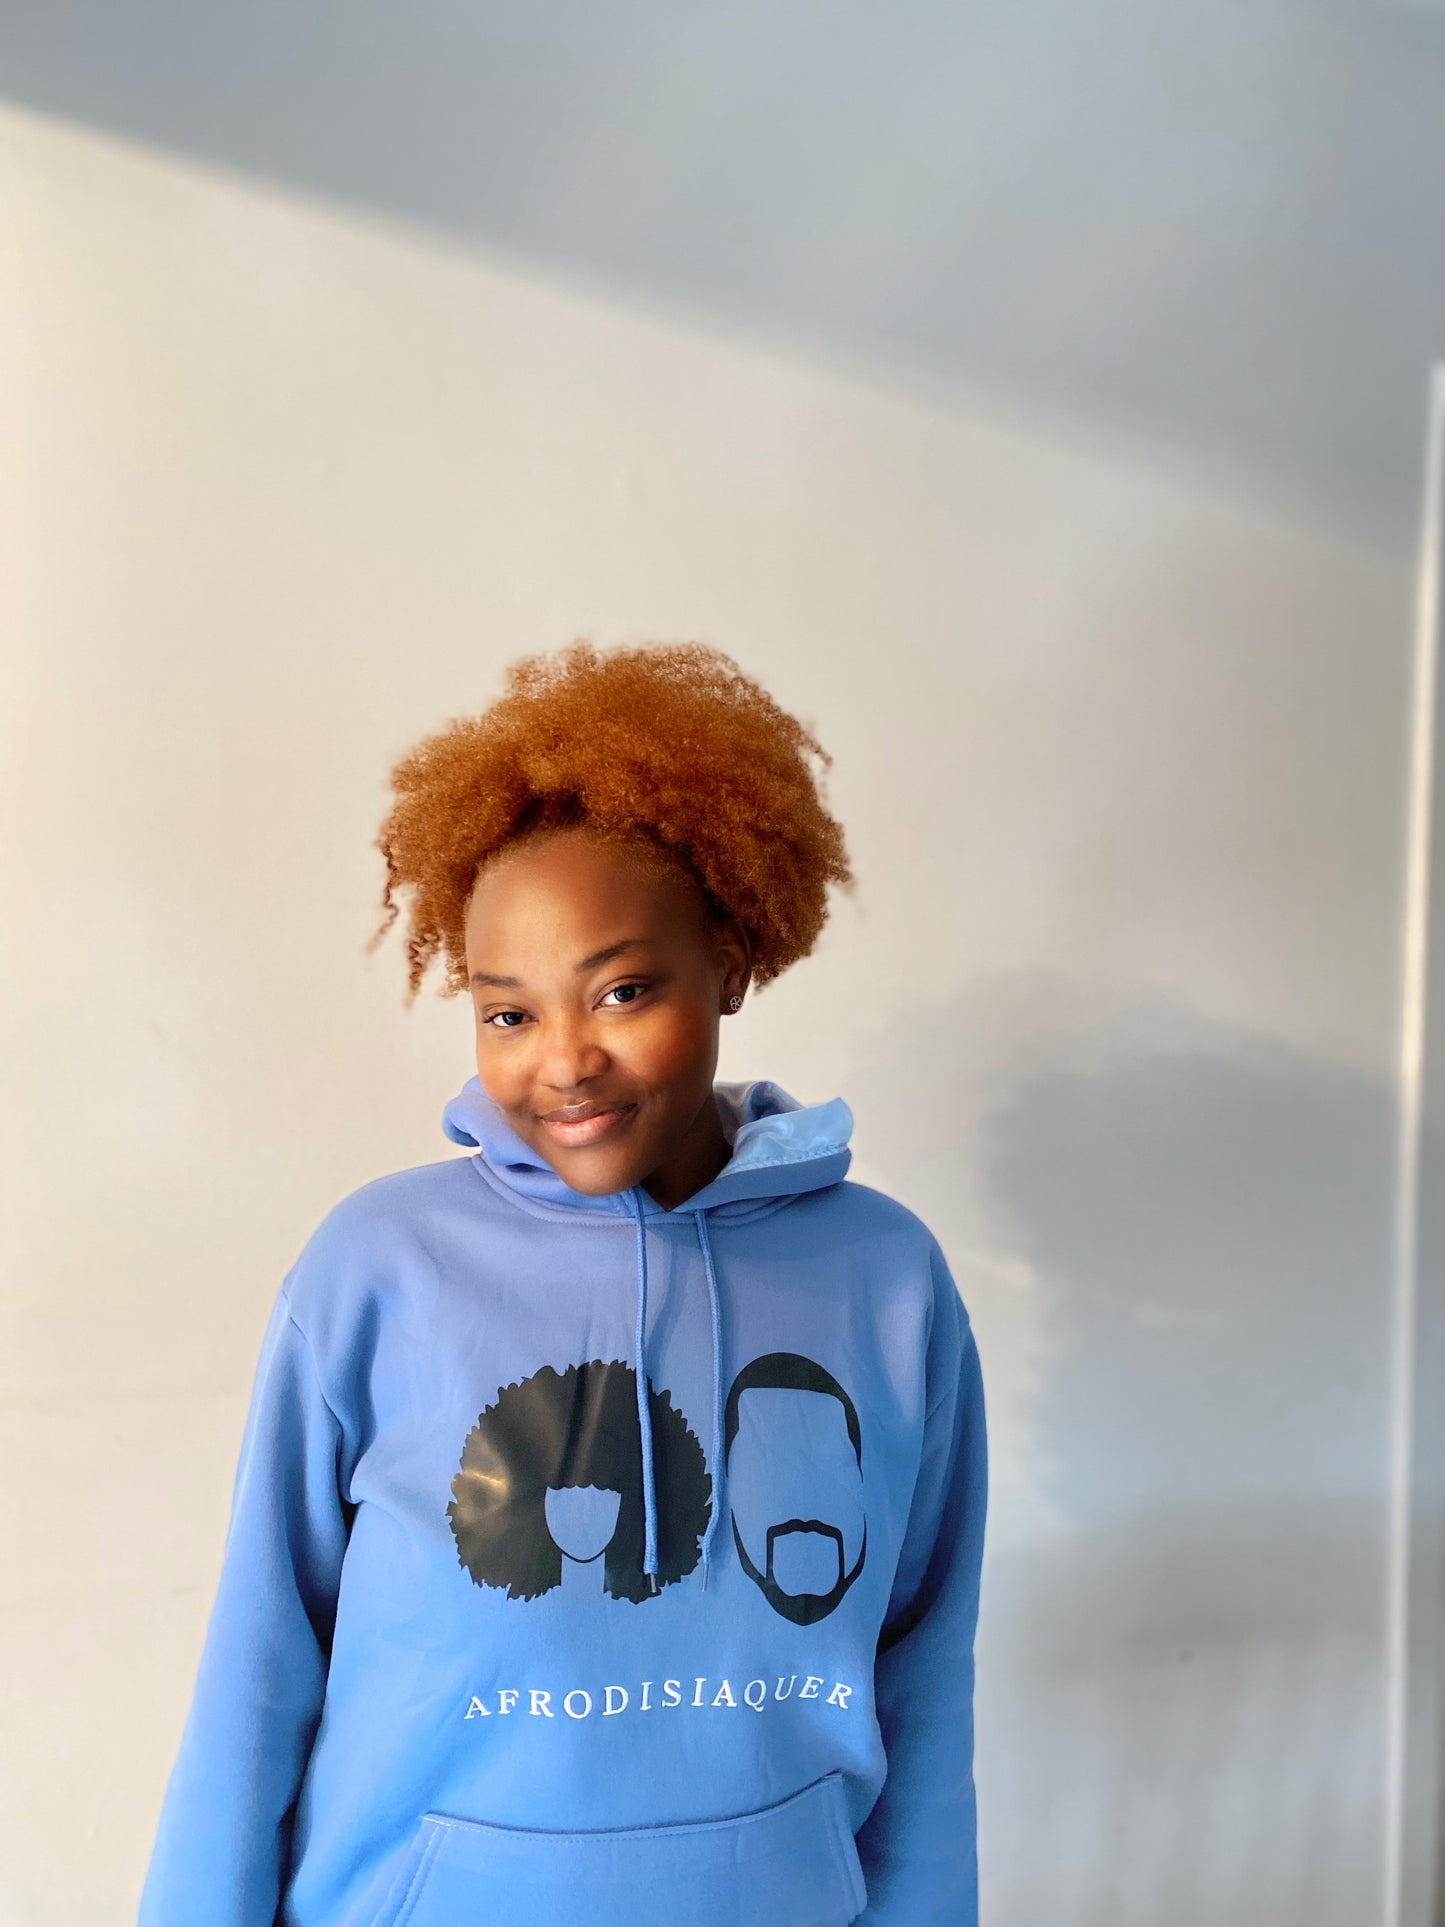 AFROdisiaqueR Hoodie in BLUE